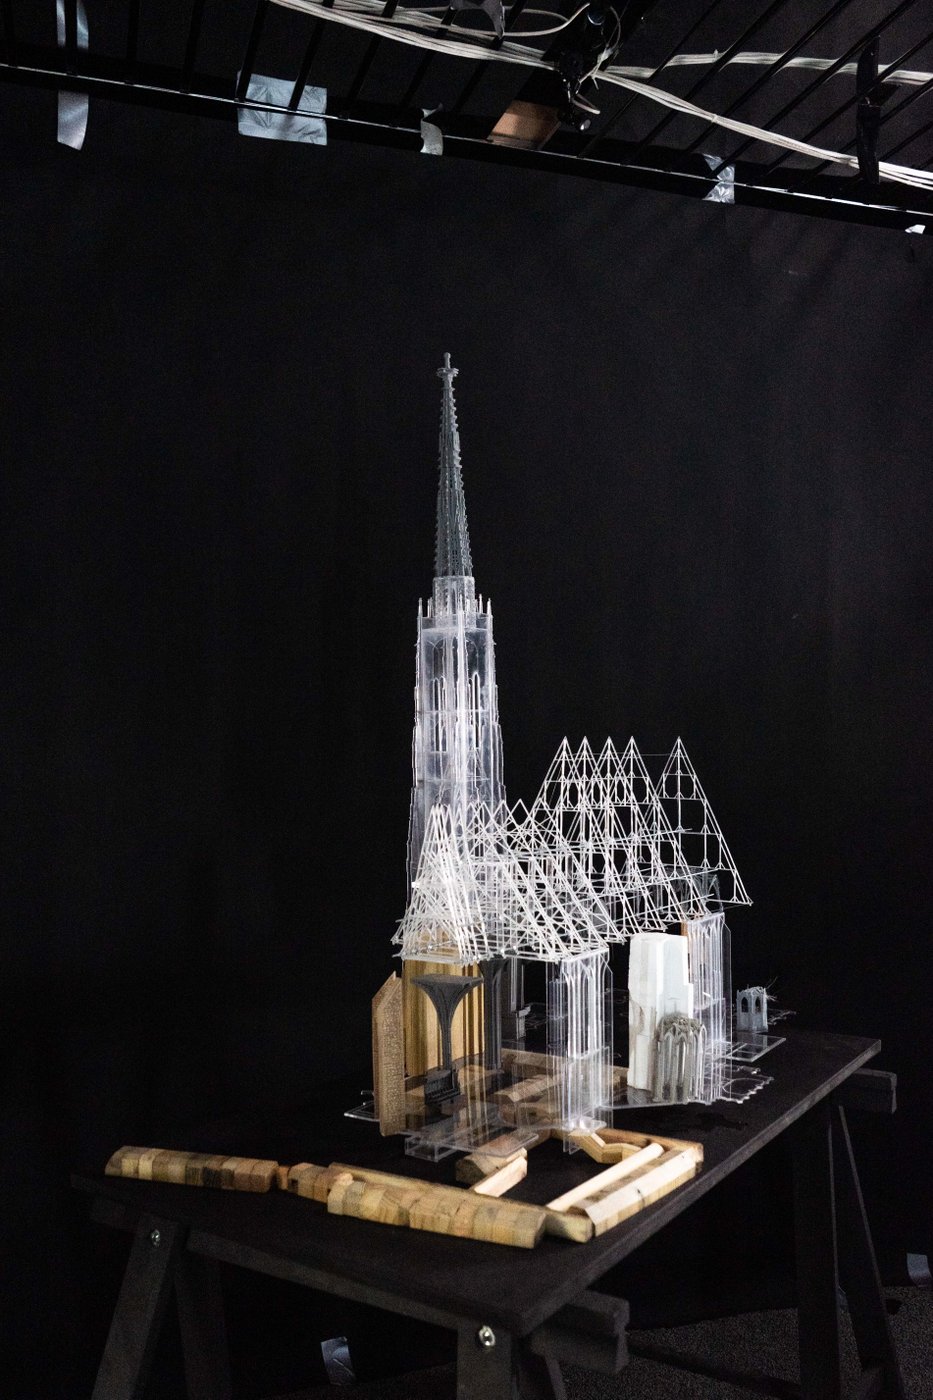 A model of St. Stephen's Cathedral in Vienna stands in front of a black background on a black table. The model consists of transparent and opaque plastic elements as well as wooden surrounding structures.